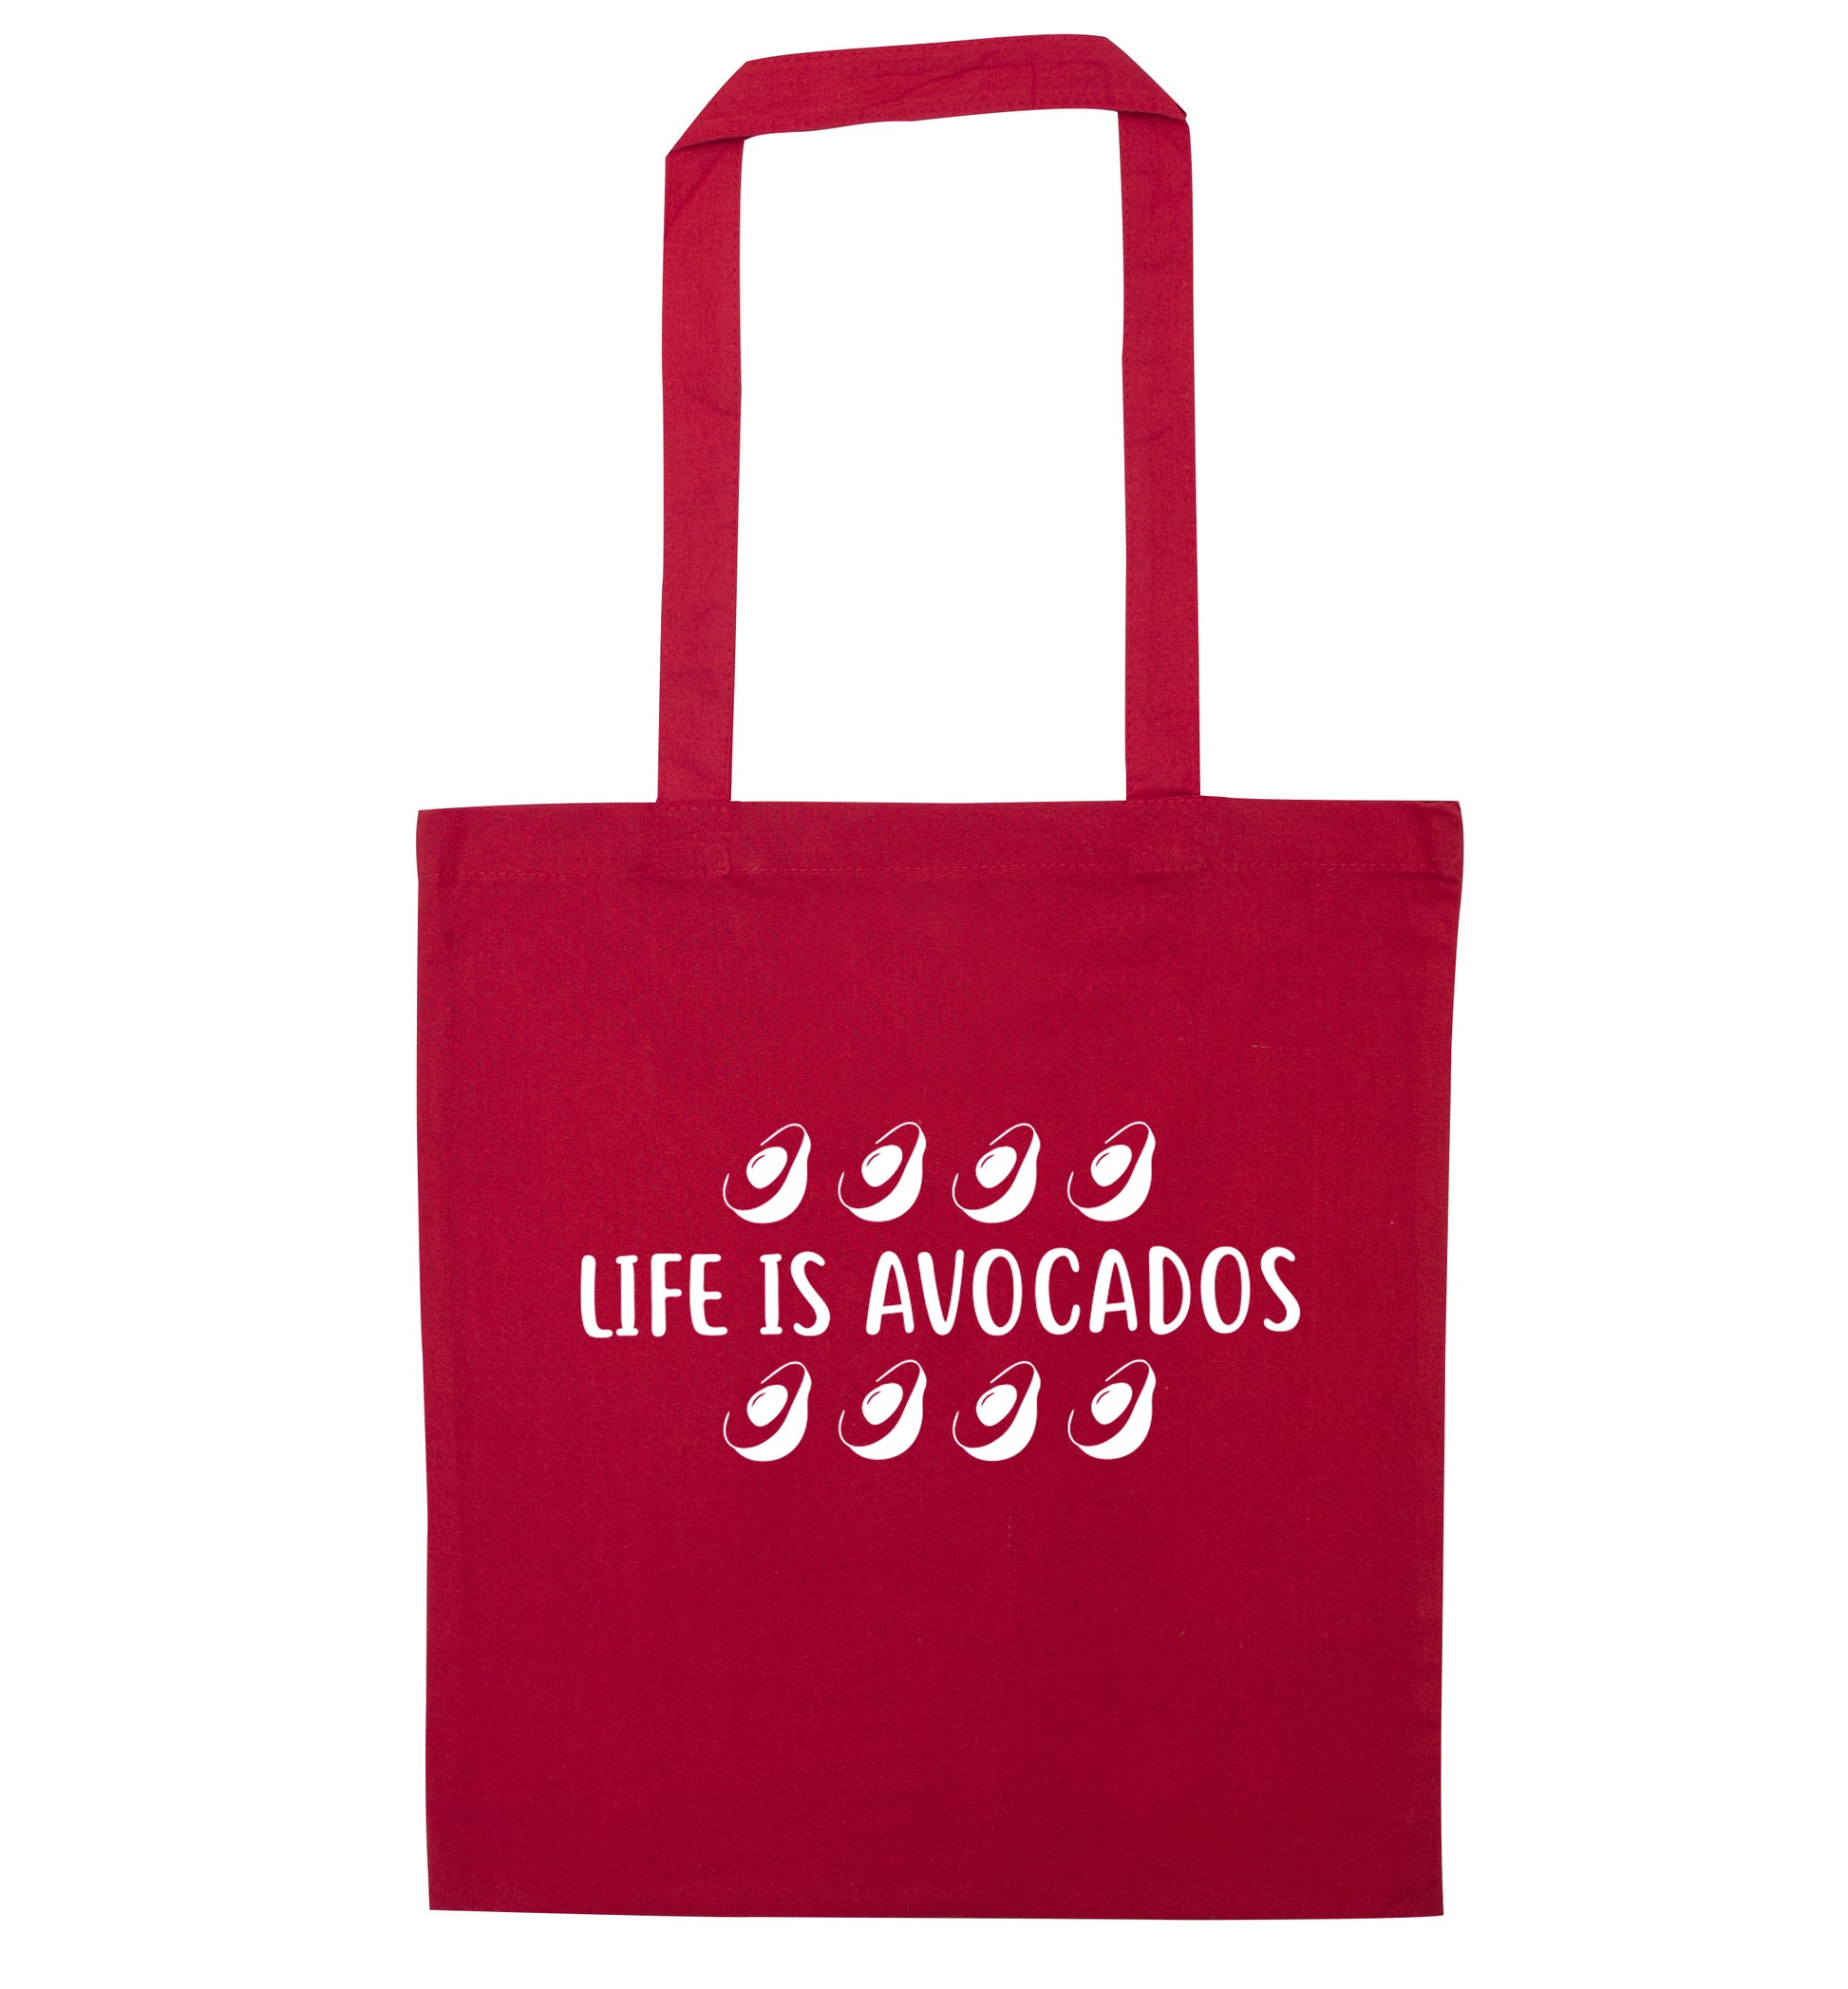 Life is avocados red tote bag